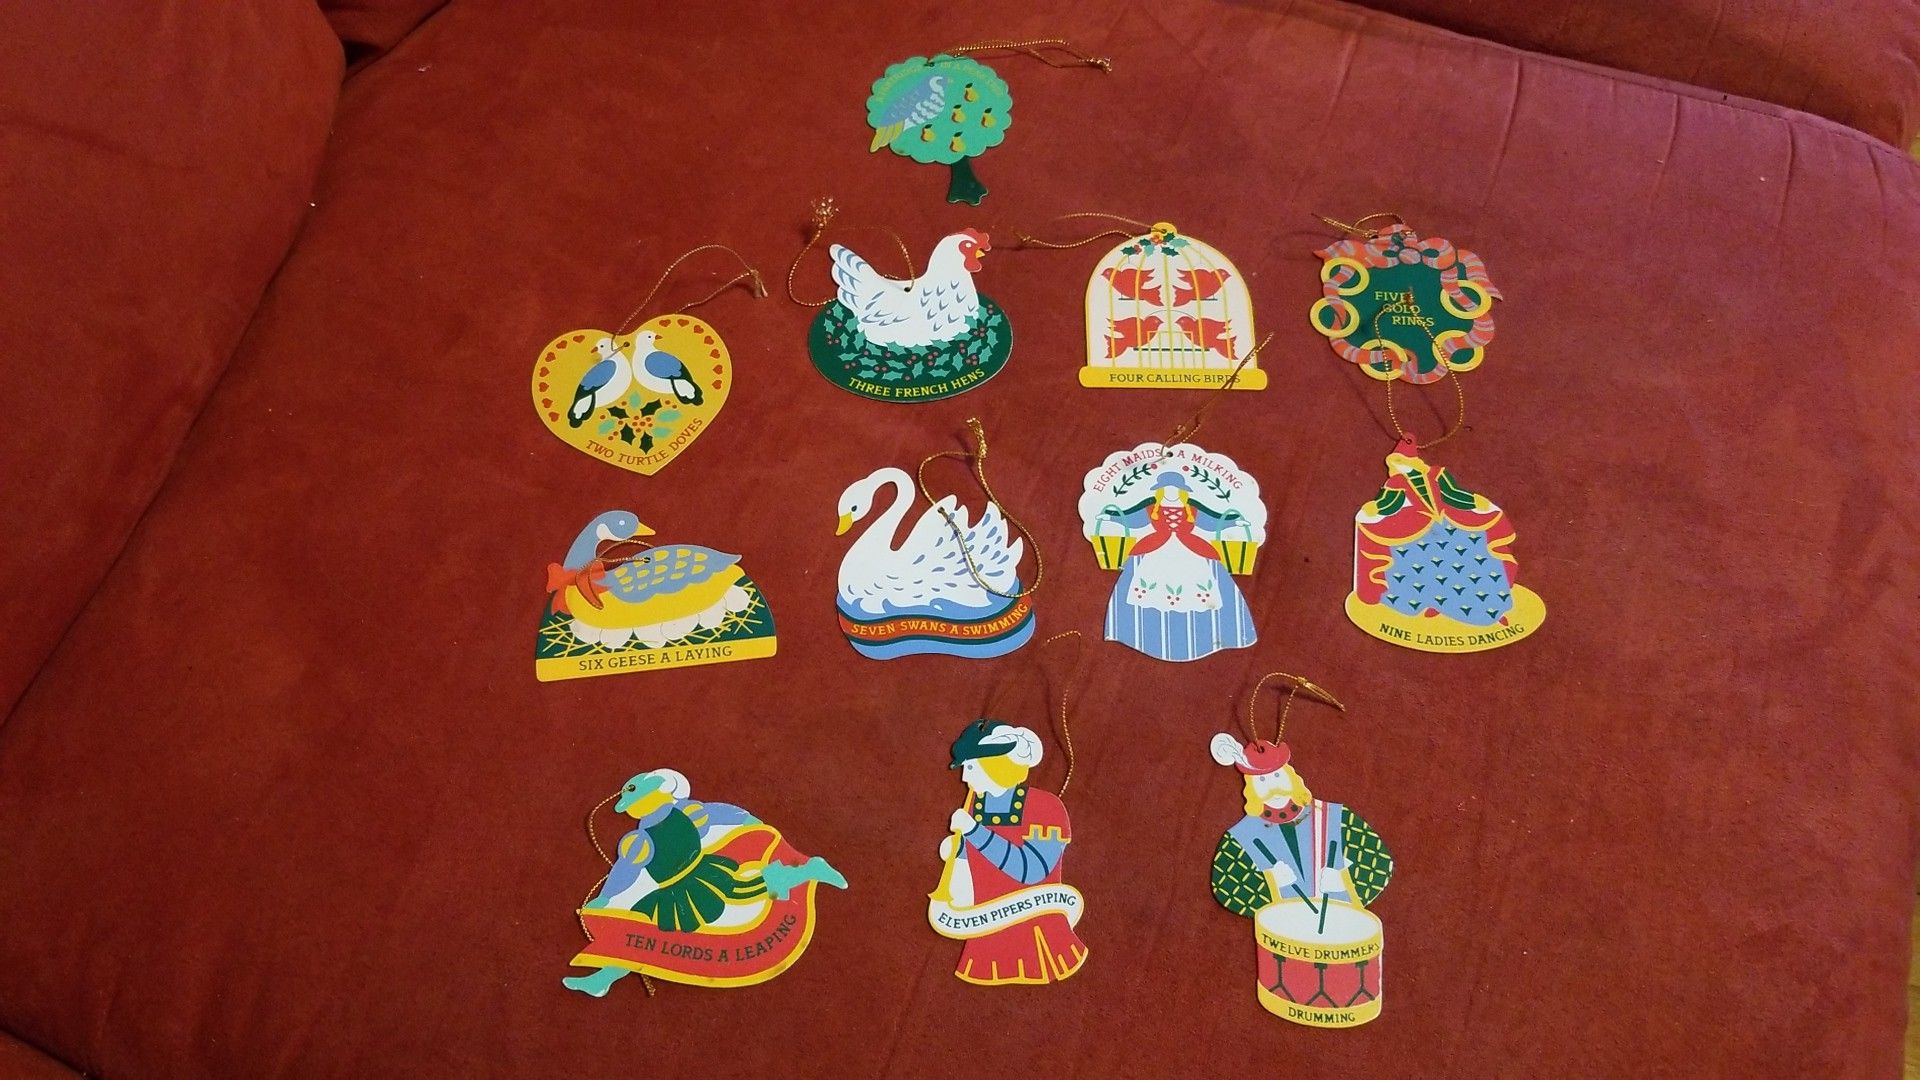 12 days of Christmas ornaments